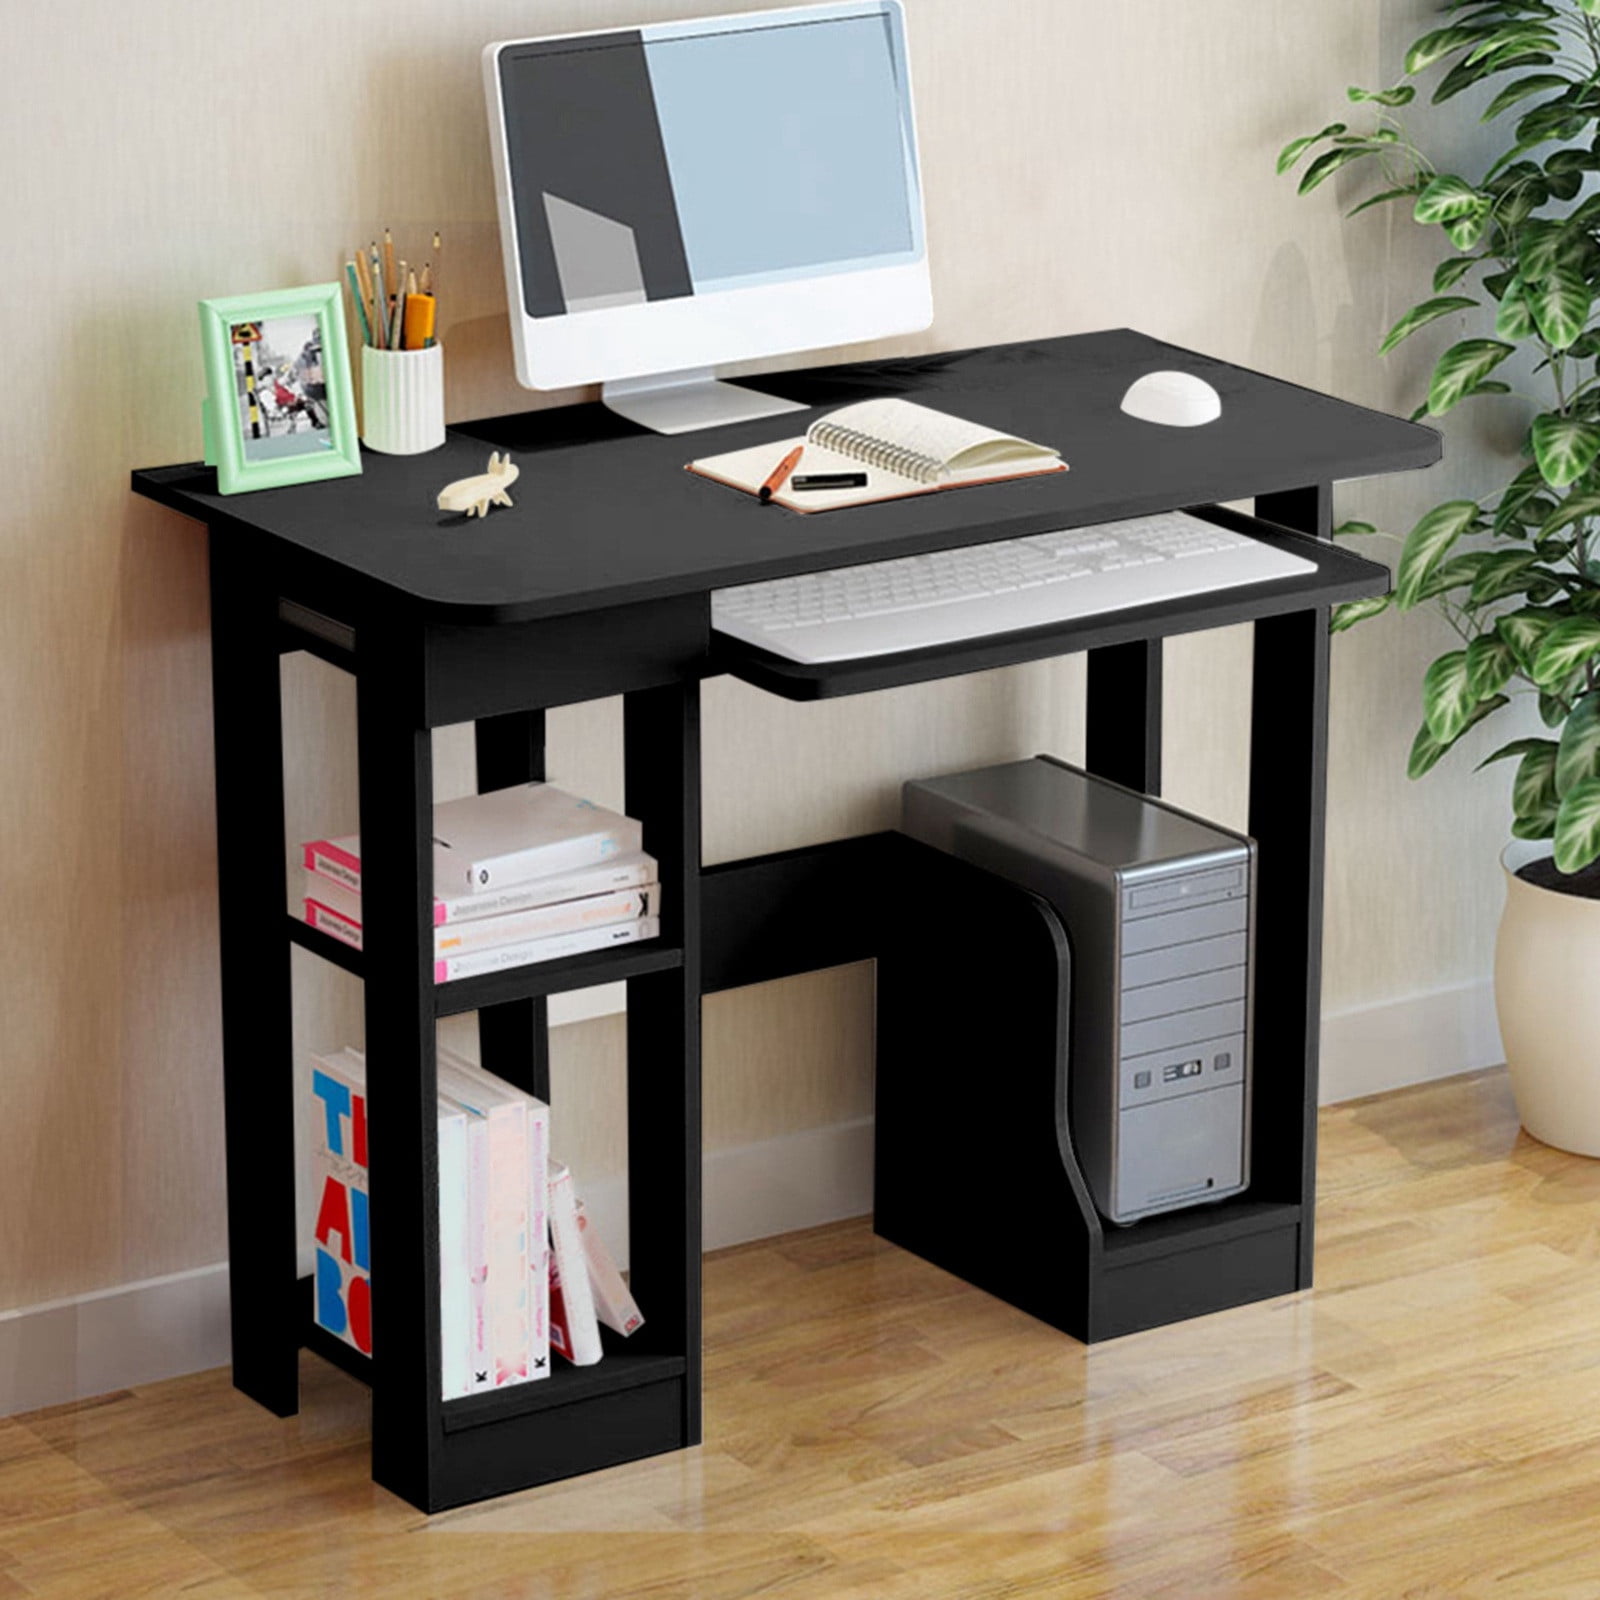 Details about   COMPUTER DESK TABLE Laptop Workstation Small Home Office Compact PC Furniture 